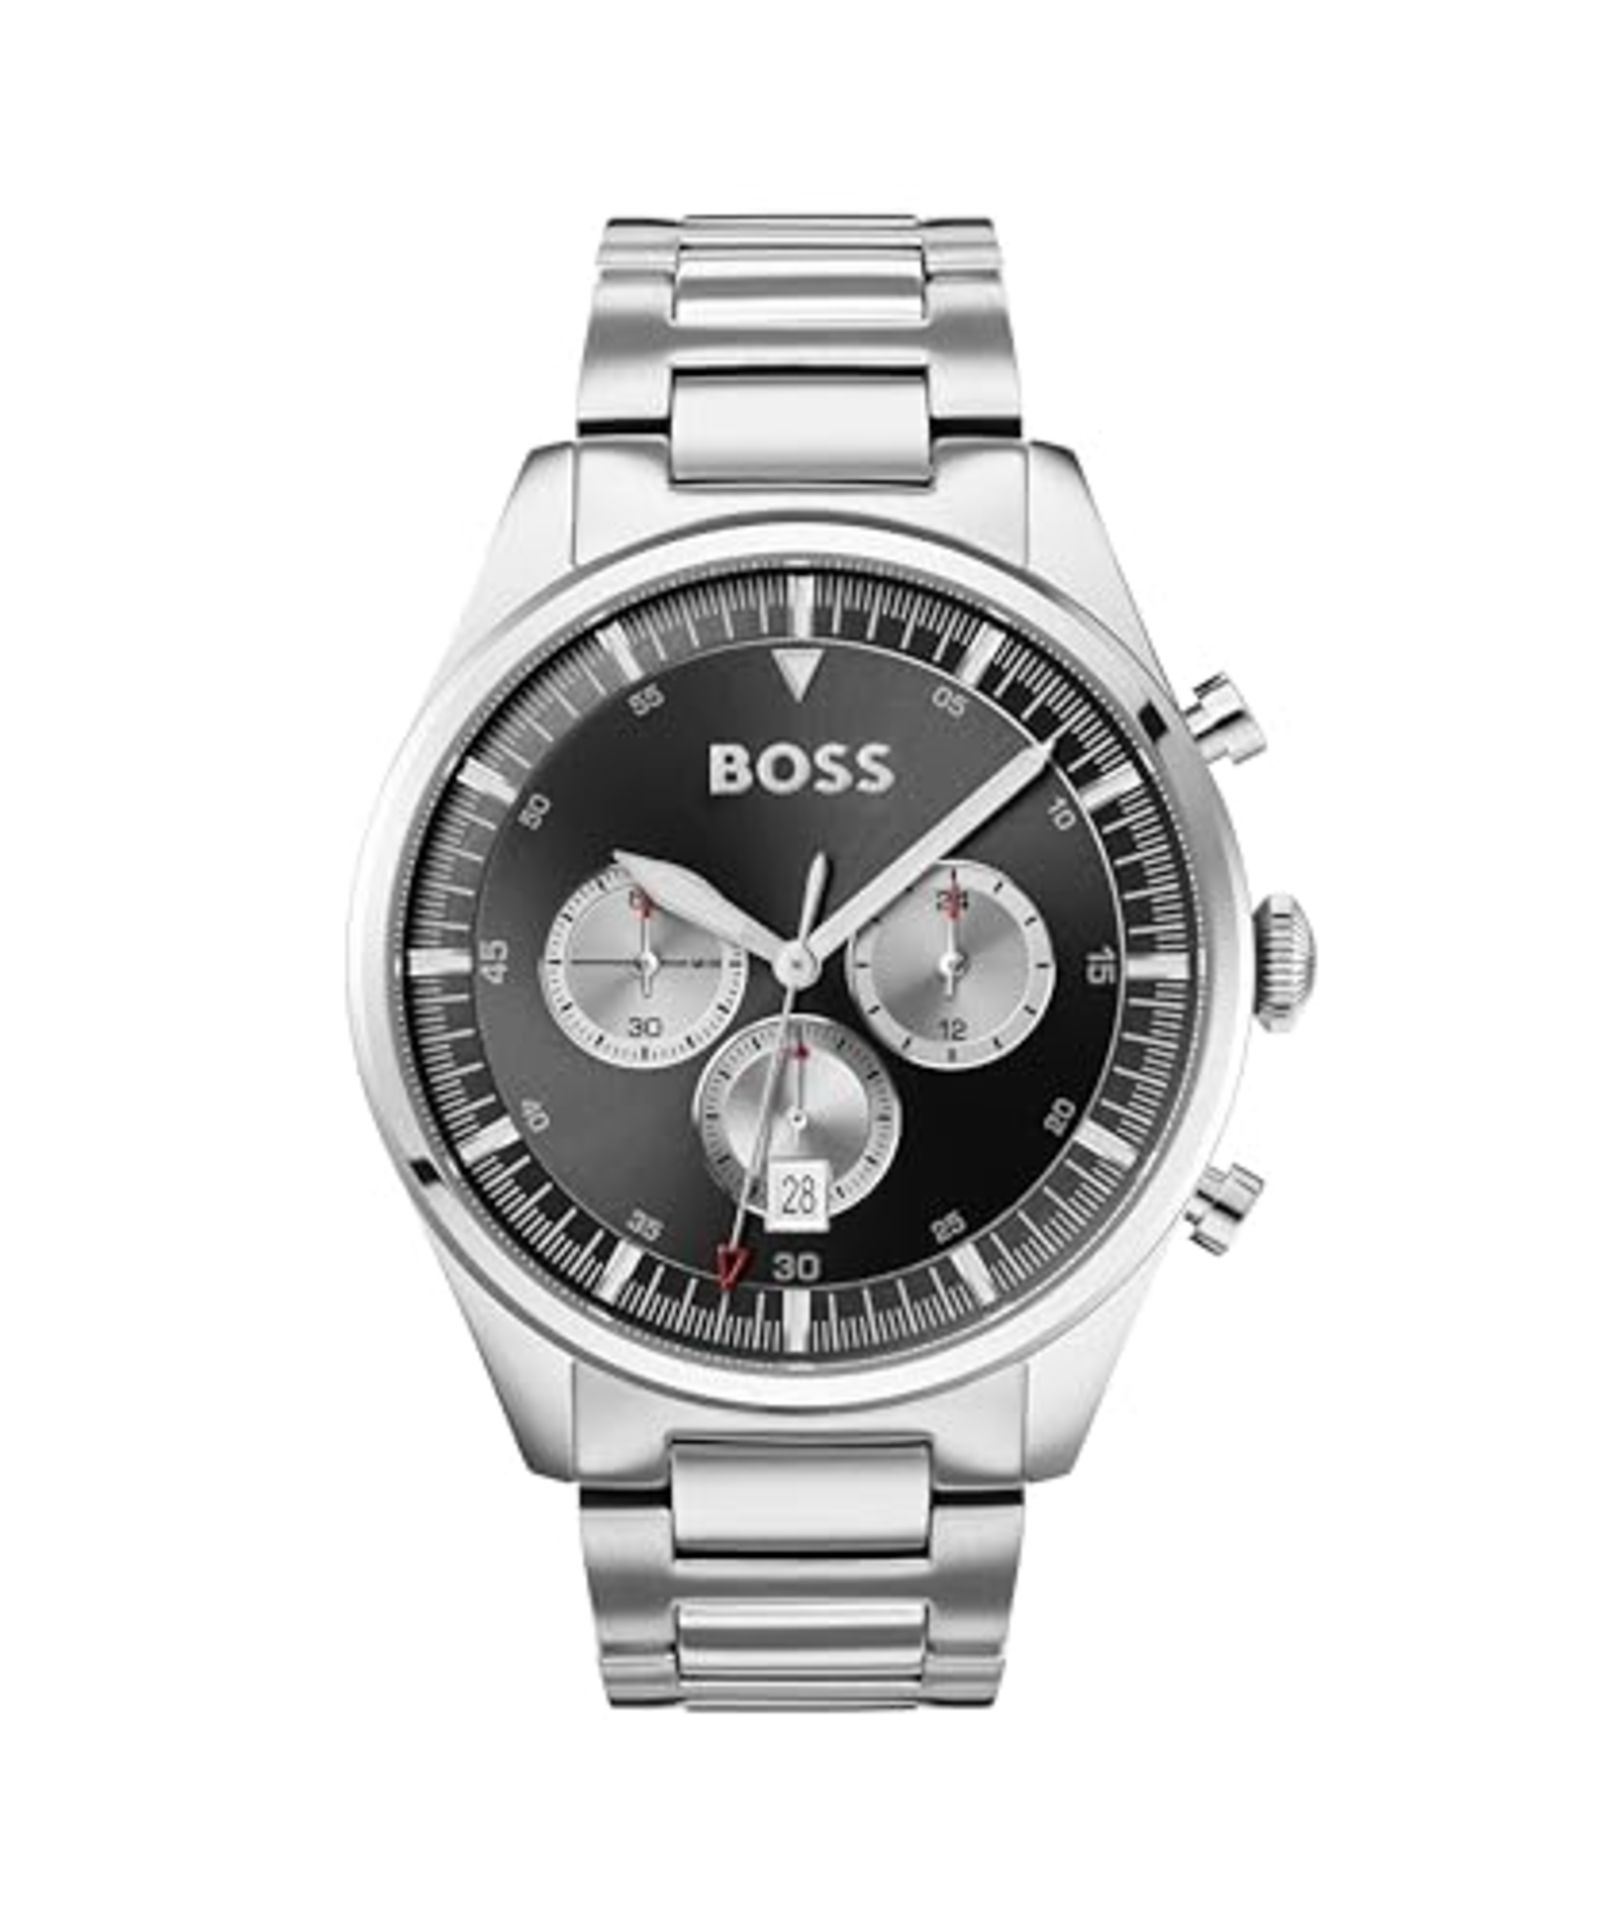 RRP £249.00 BOSS Chronograph Quartz Watch for Men with Silver Stainless Steel Bracelet - 1513712 - Image 4 of 6